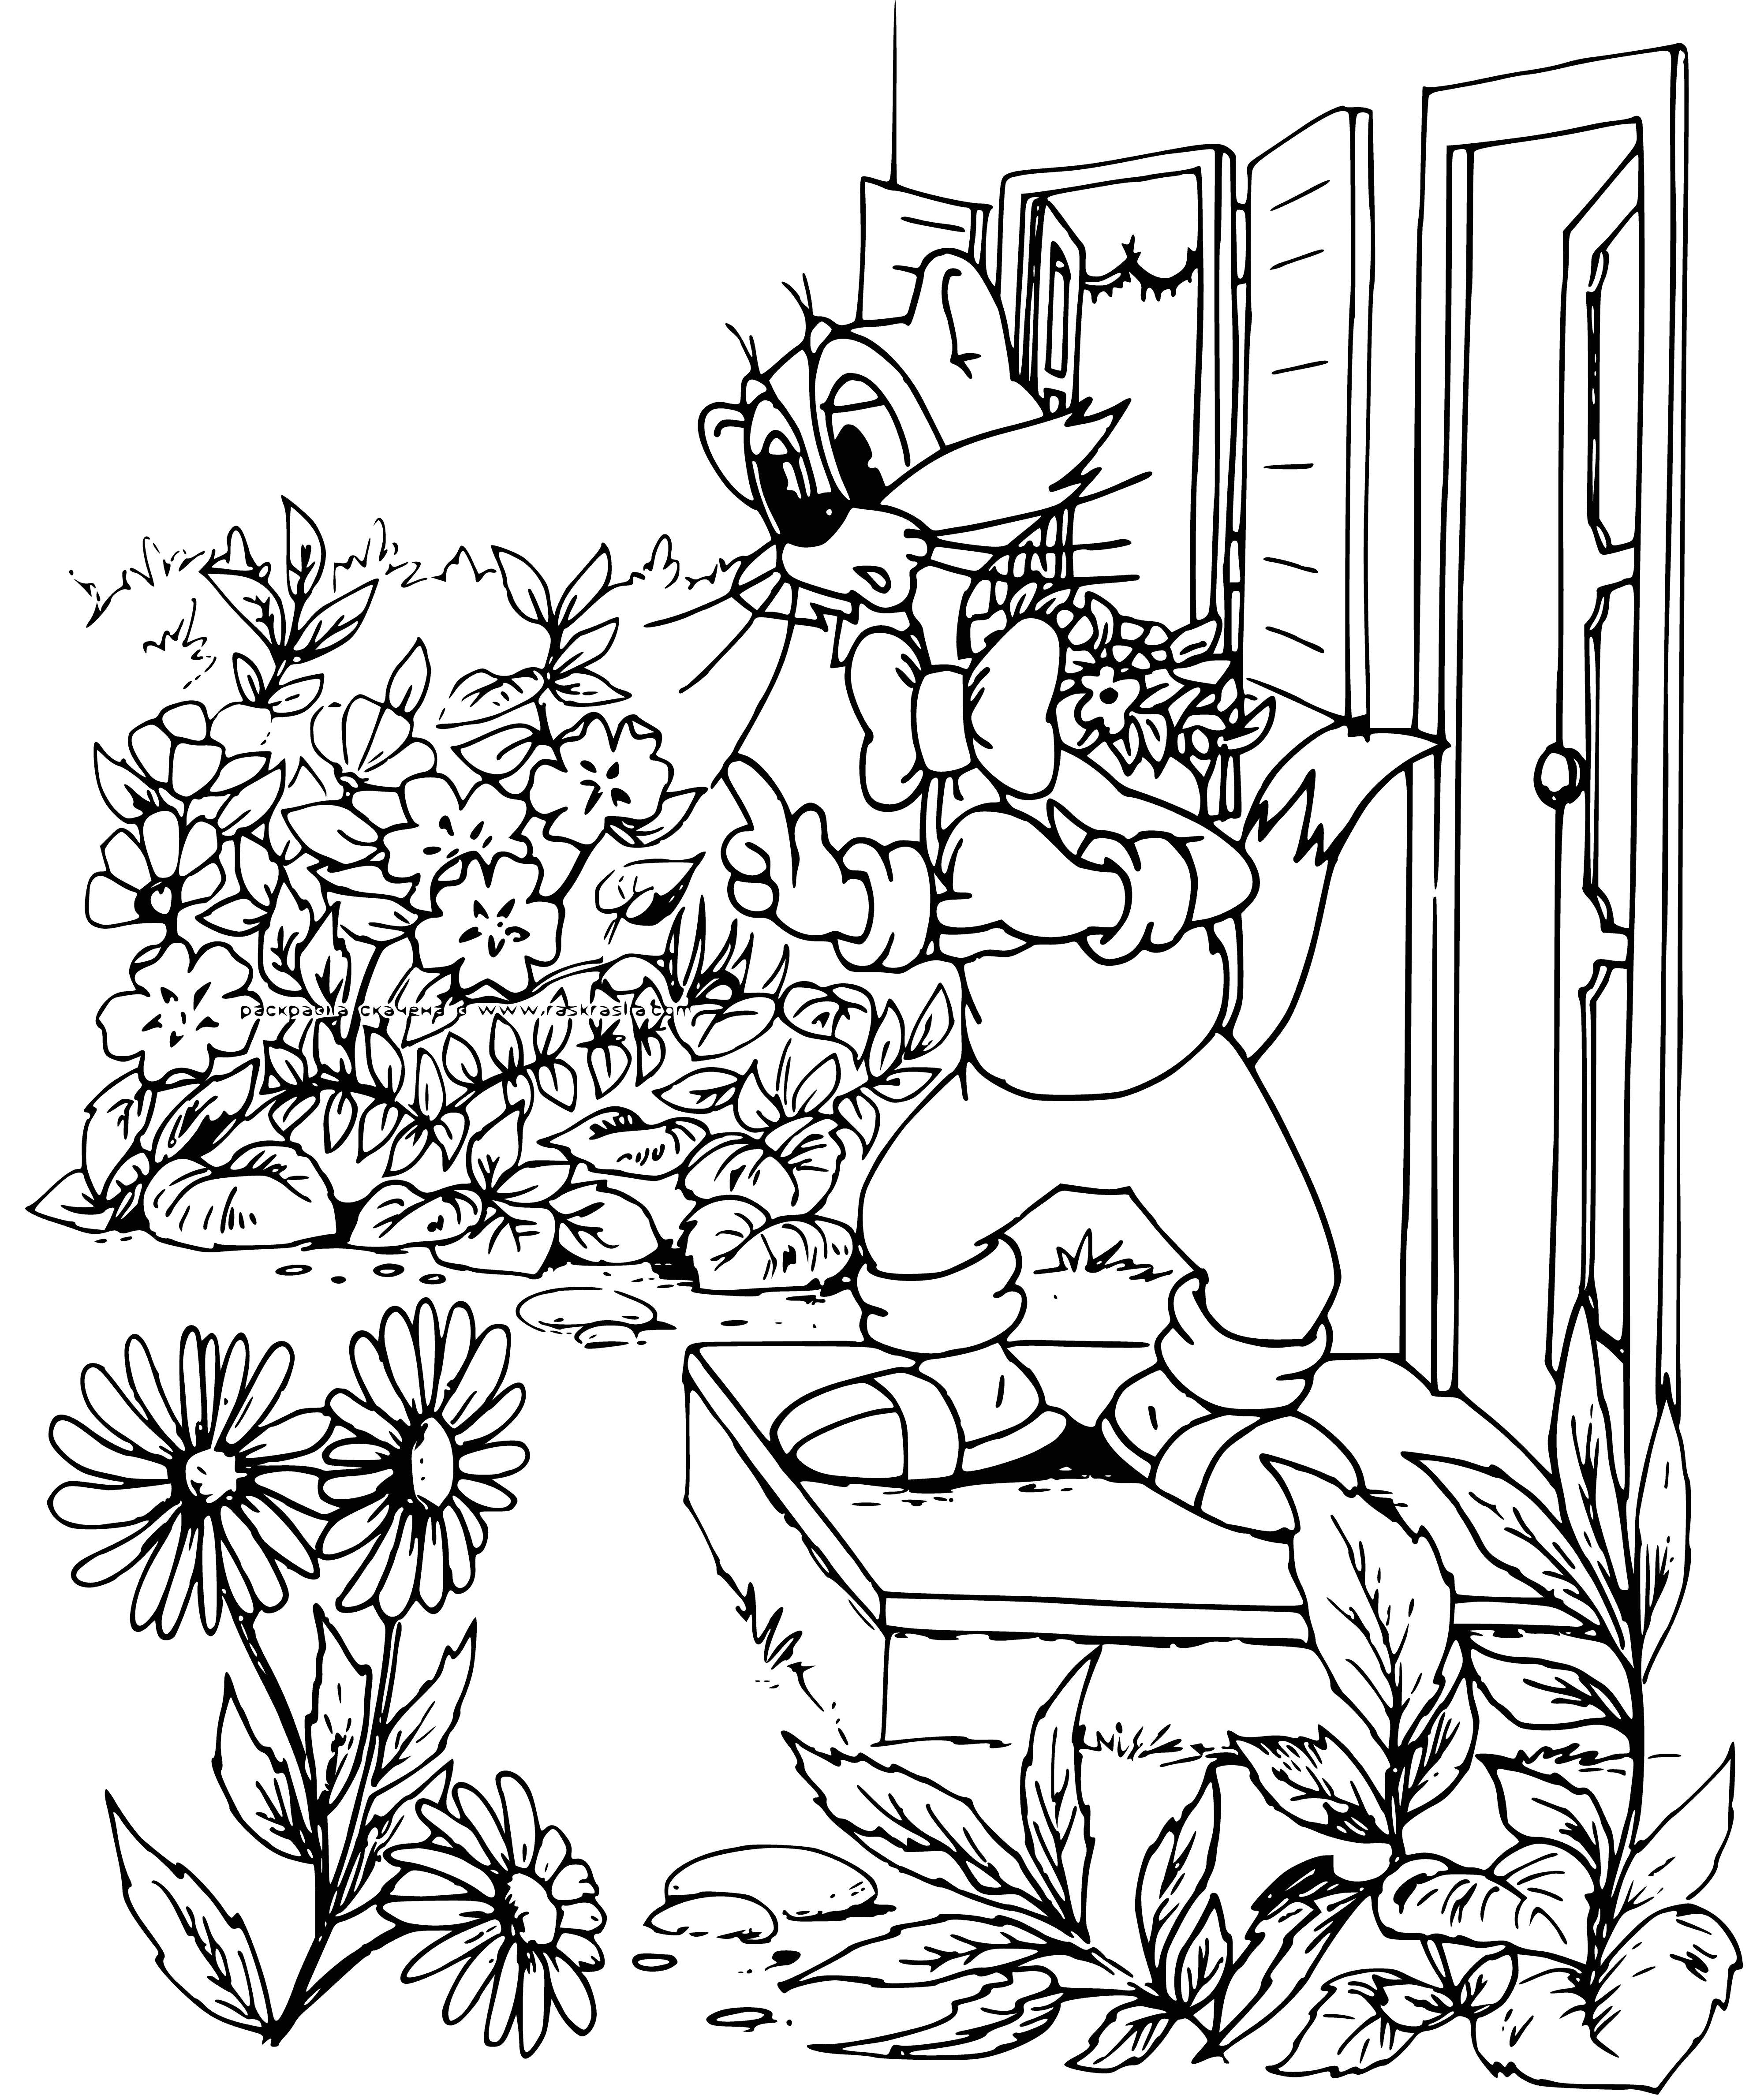 coloring page: Gray and white cat, Leopold, waits on doorstep, looking off into the night, lit by nearby lamp post.